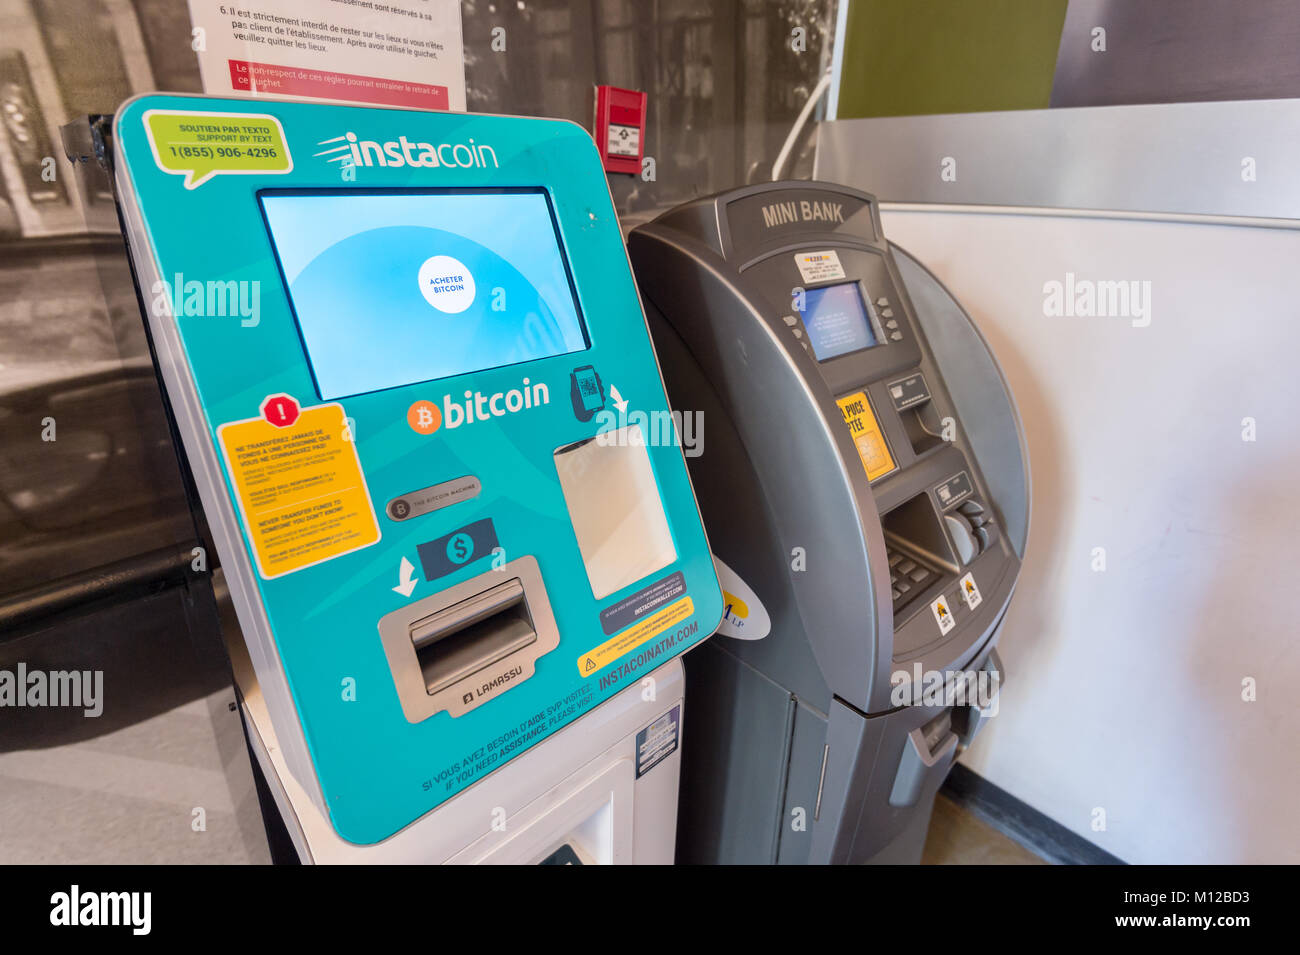 Bitcoin Atm Machine Instacoin In Montreal Canada Stock Photo - 